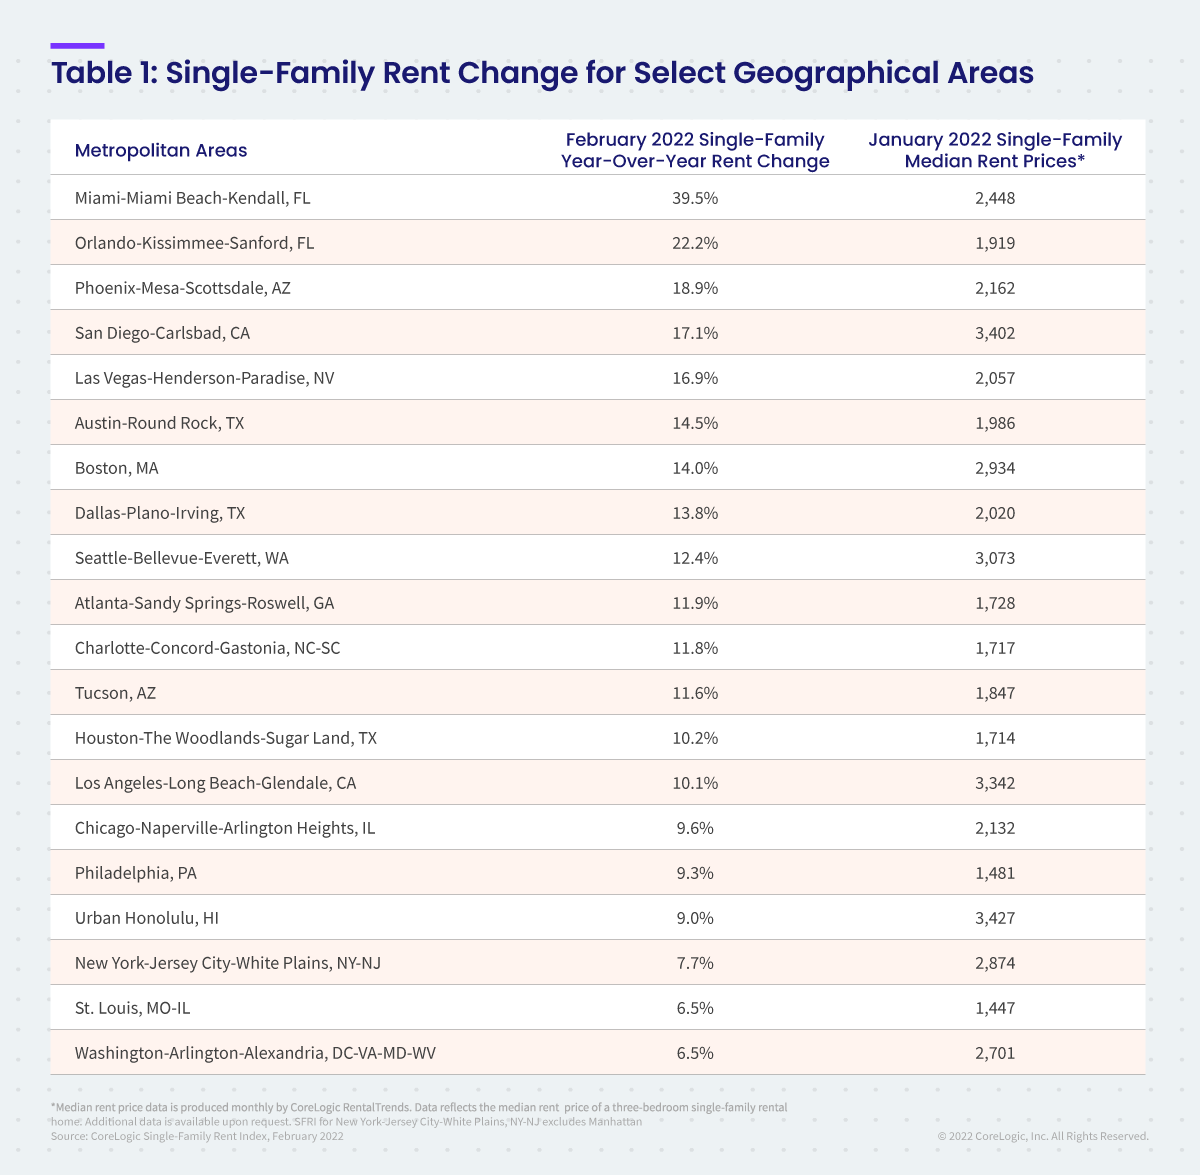 A table charting the change in single-family rent year-over-year by select areas of the U.S.